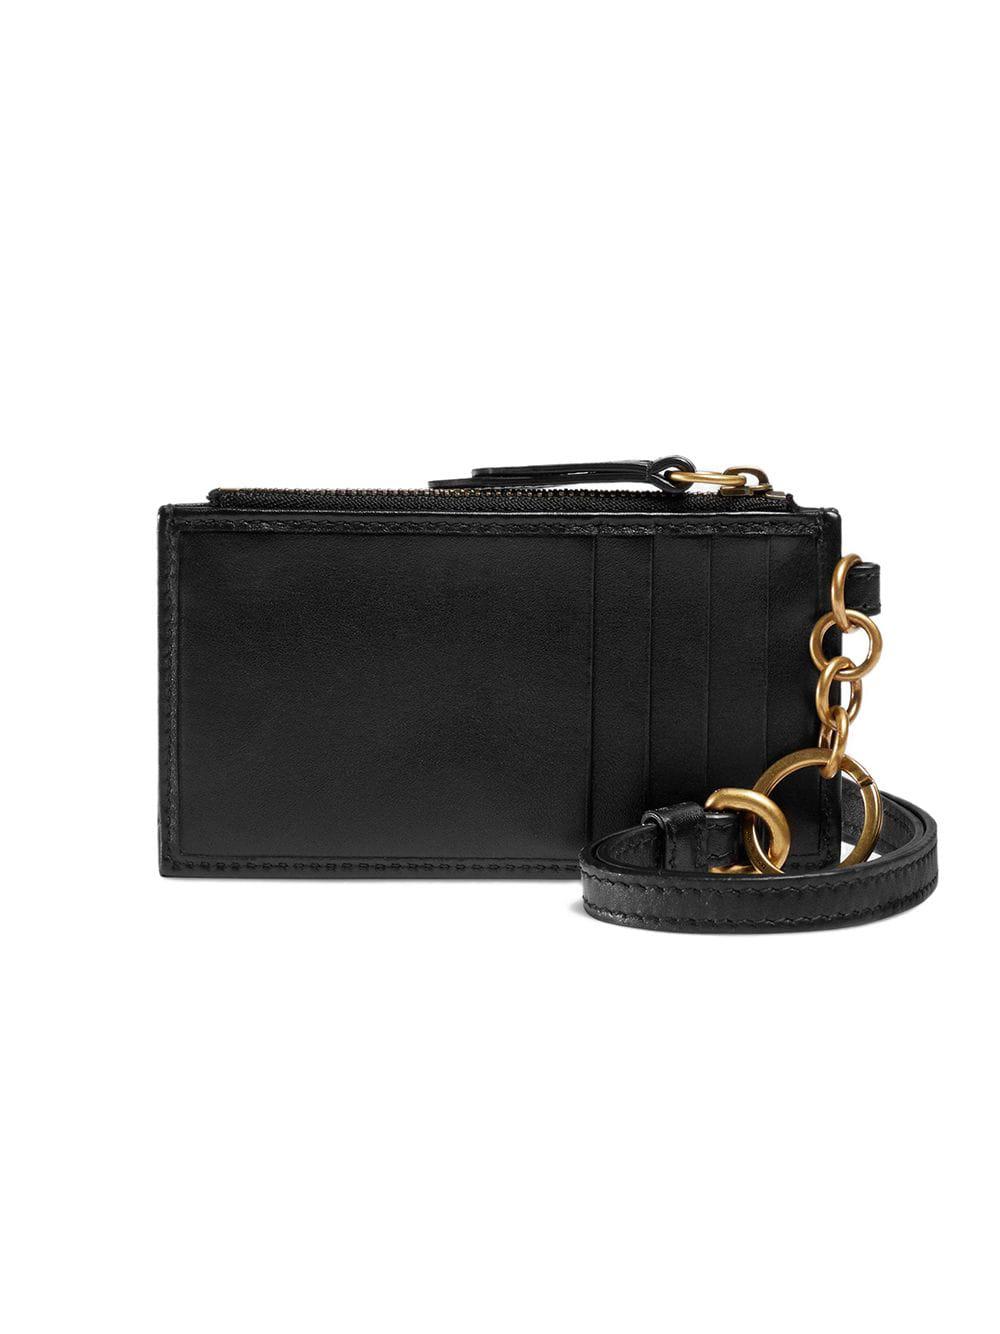 Gucci GG Marmont Card Holder in Black - Lyst